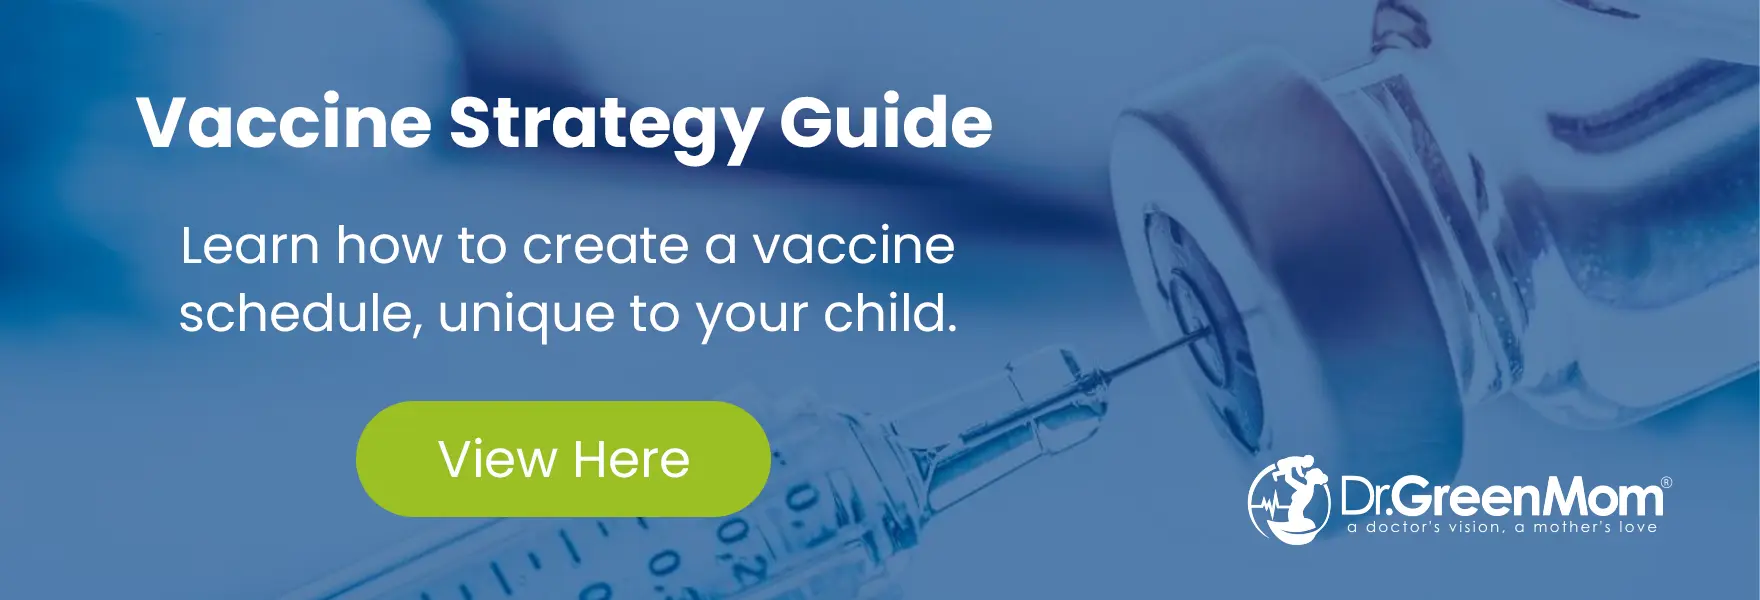 Vaccine Strategy Guide - Dr. Green Mom